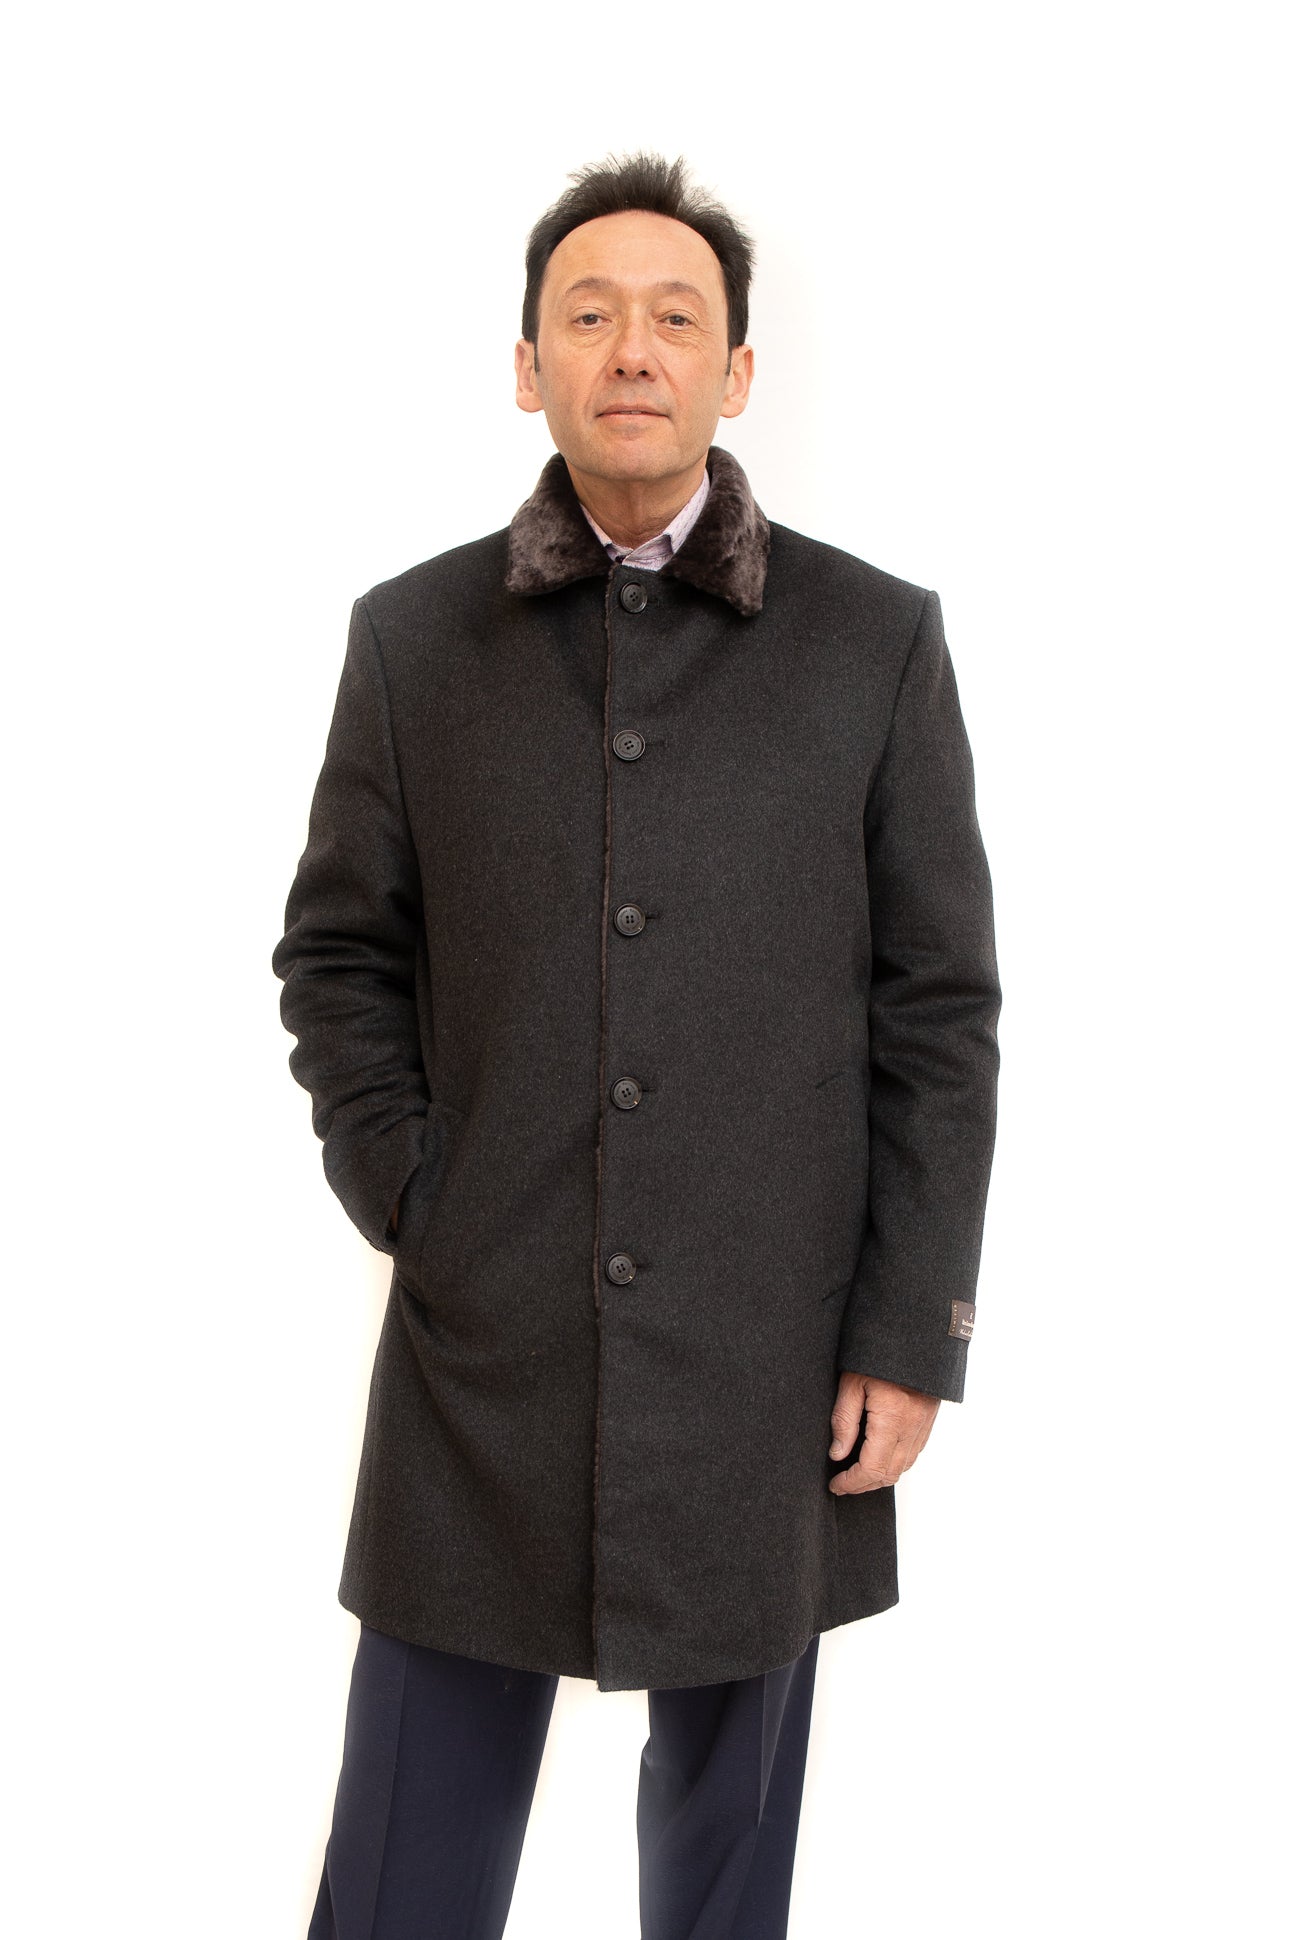 cashmere wool coat with fur collar at vollbracht furs in cleveland, ohio